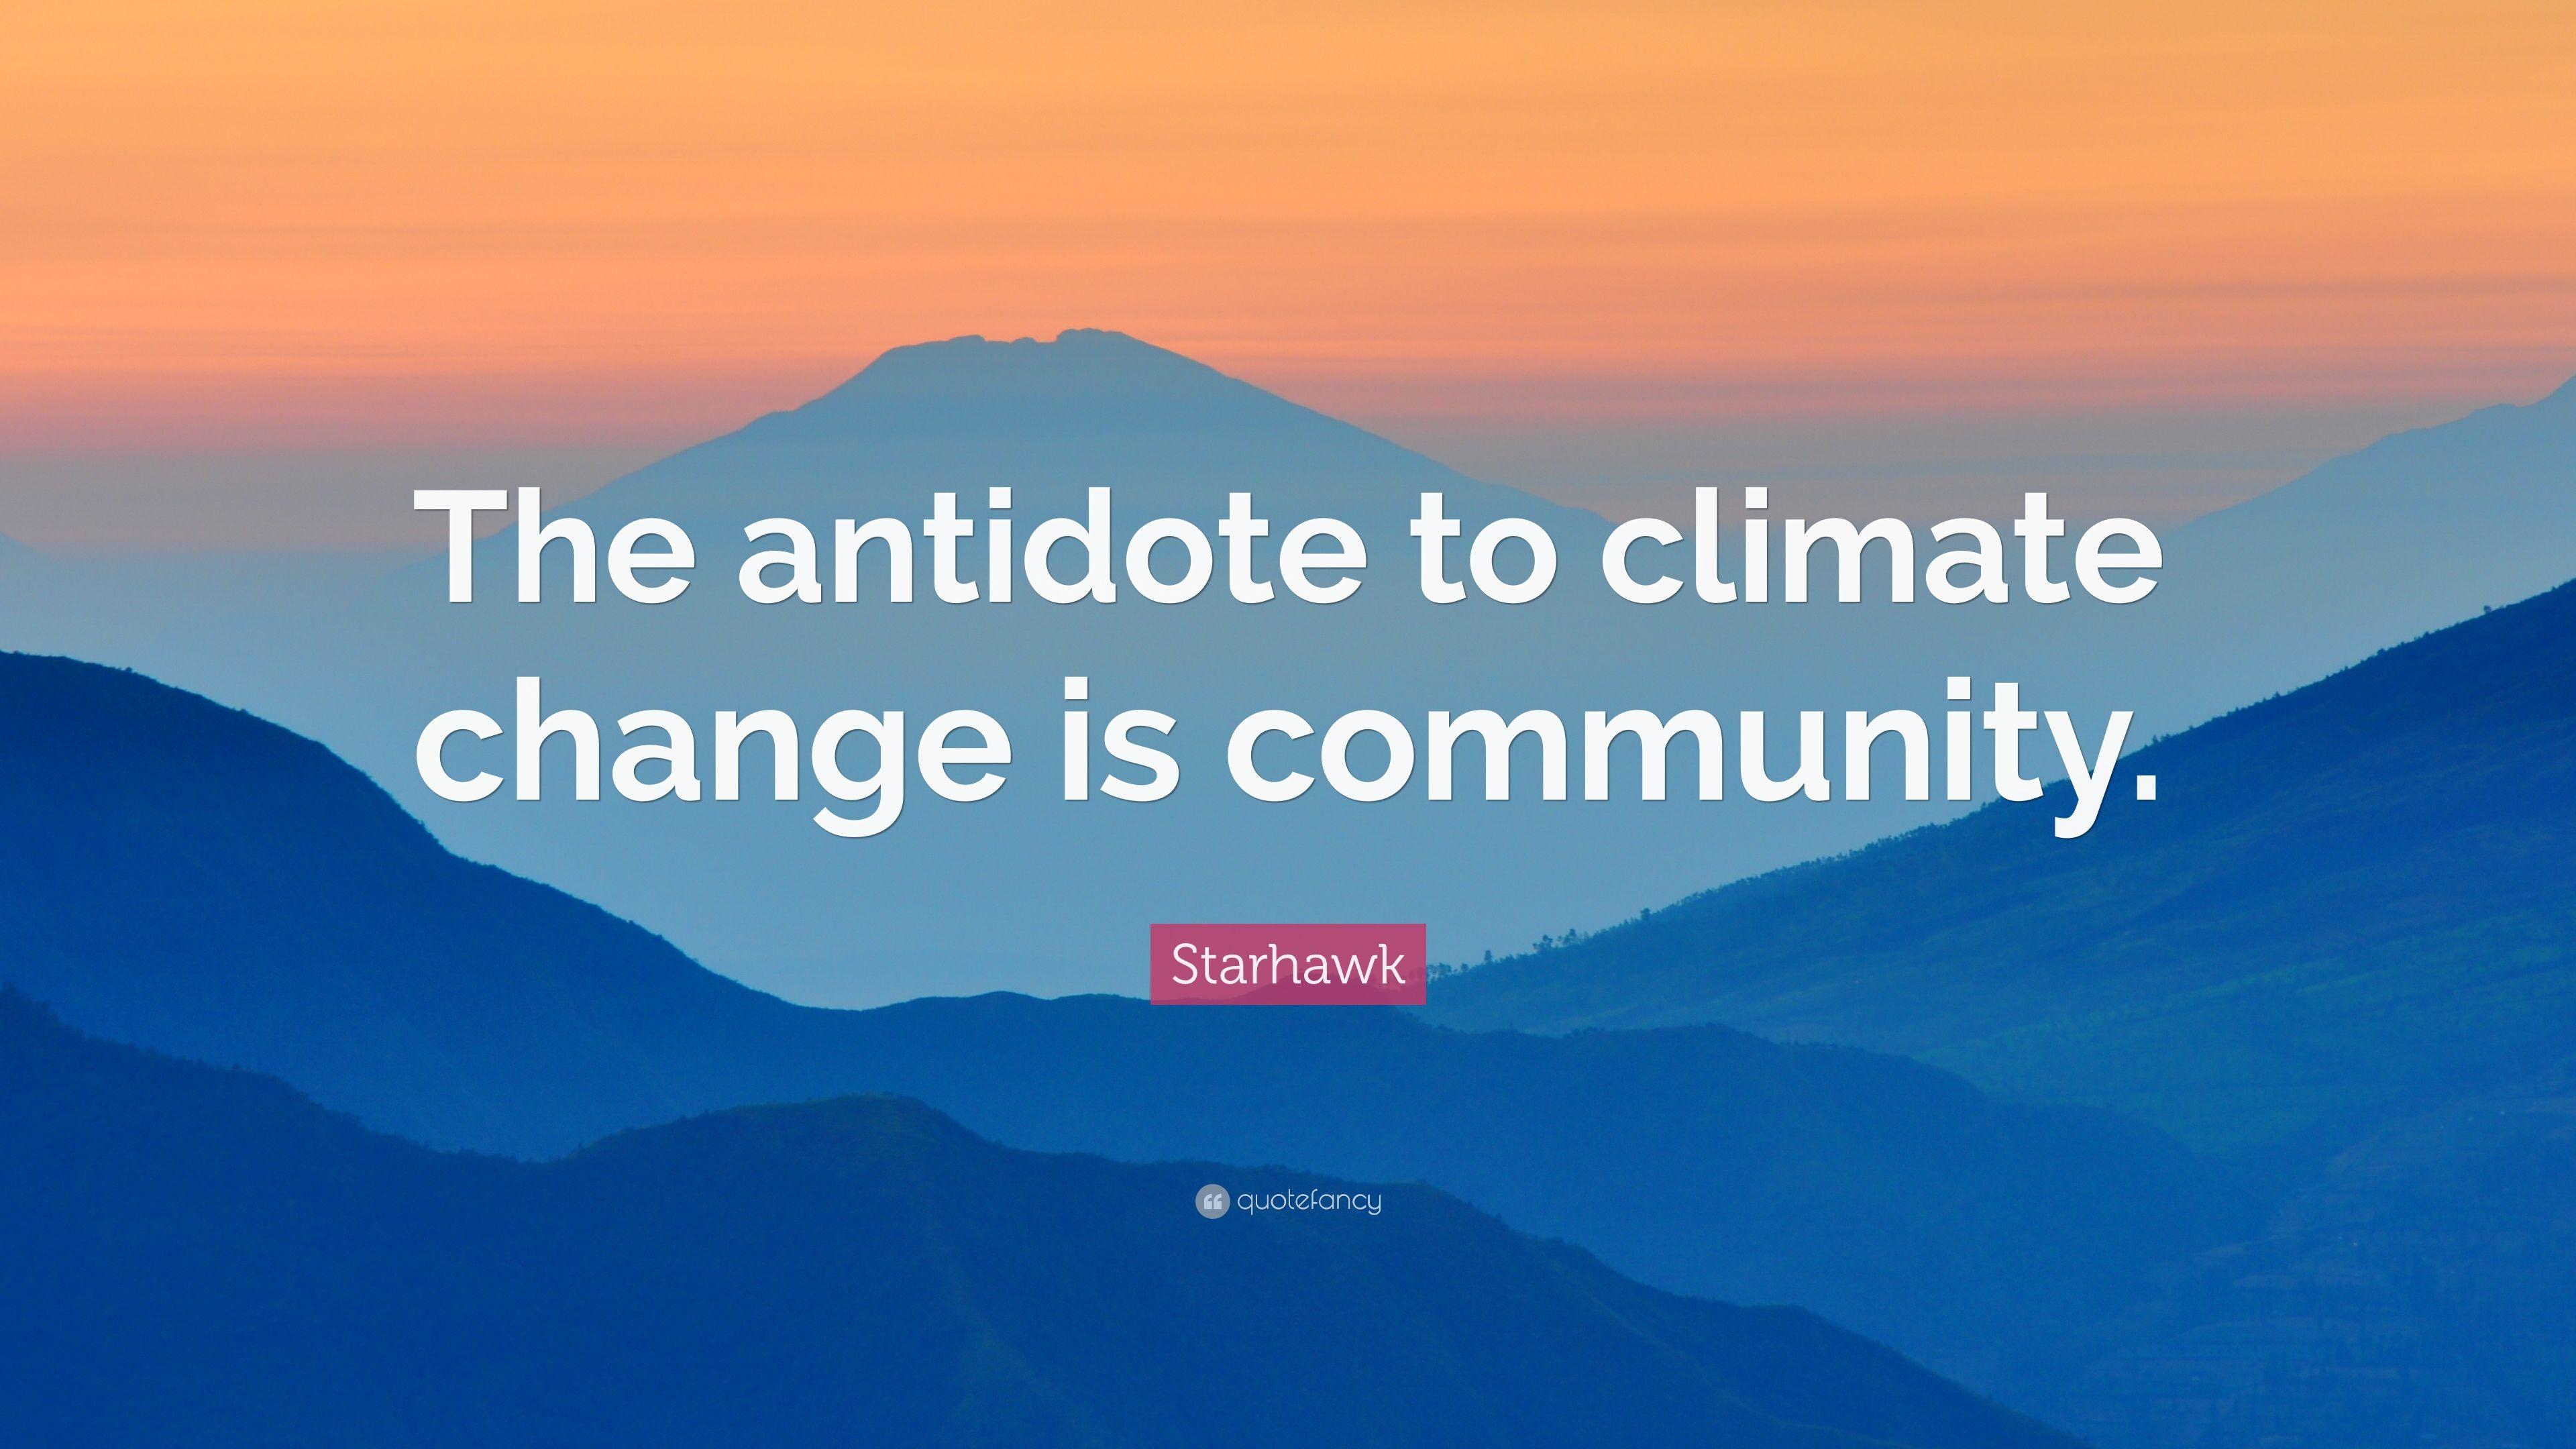 Starhawk Quote: “The antidote to climate change is community.” 7